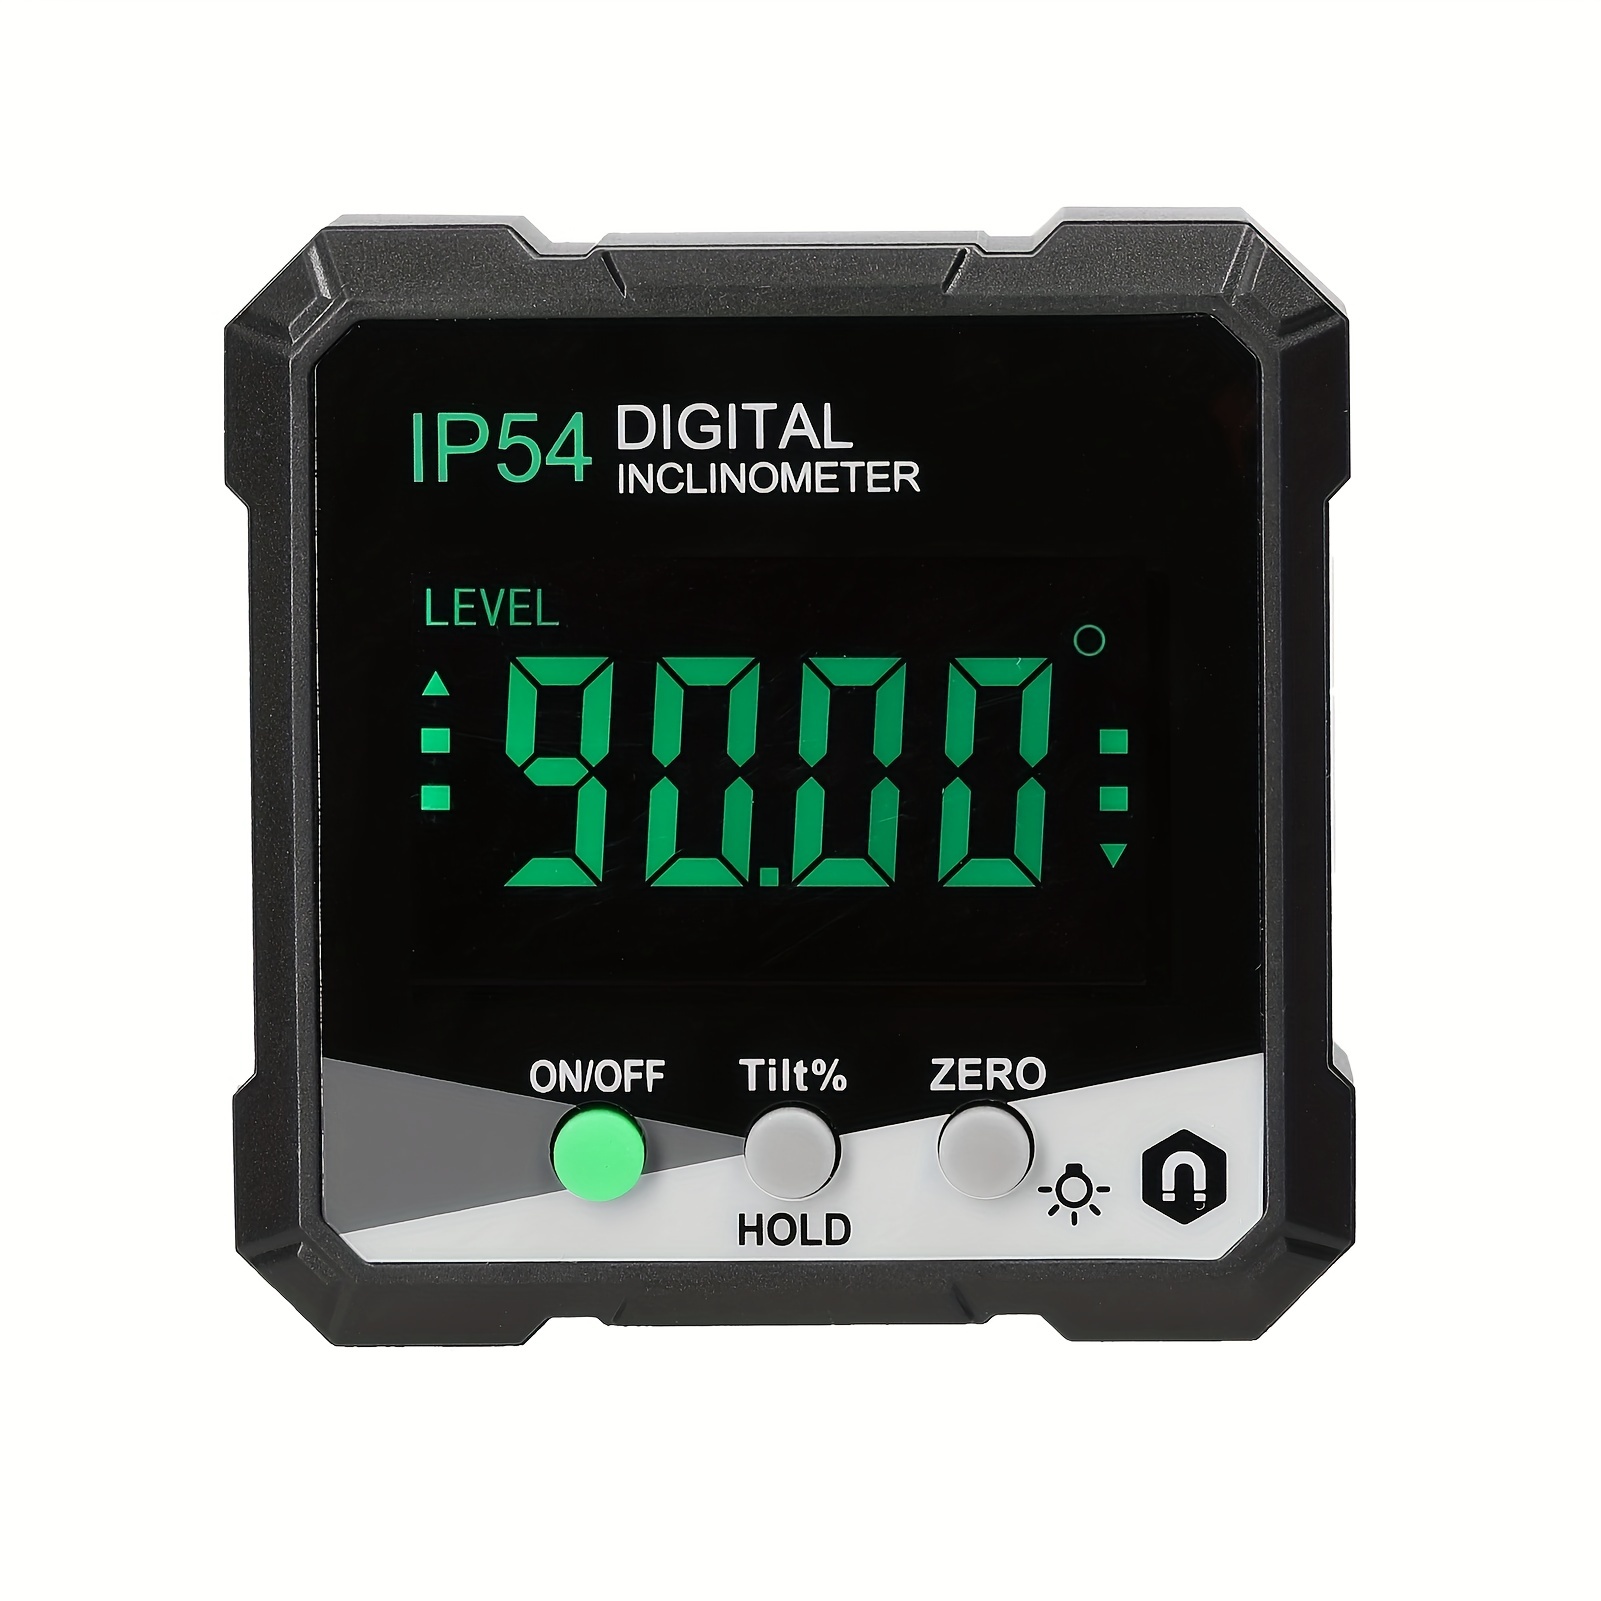 Accurately Measure Angles with this 4x90° Digital Level Angle Gauge - 360°  Mini Inclinometer with Magnetic Base!